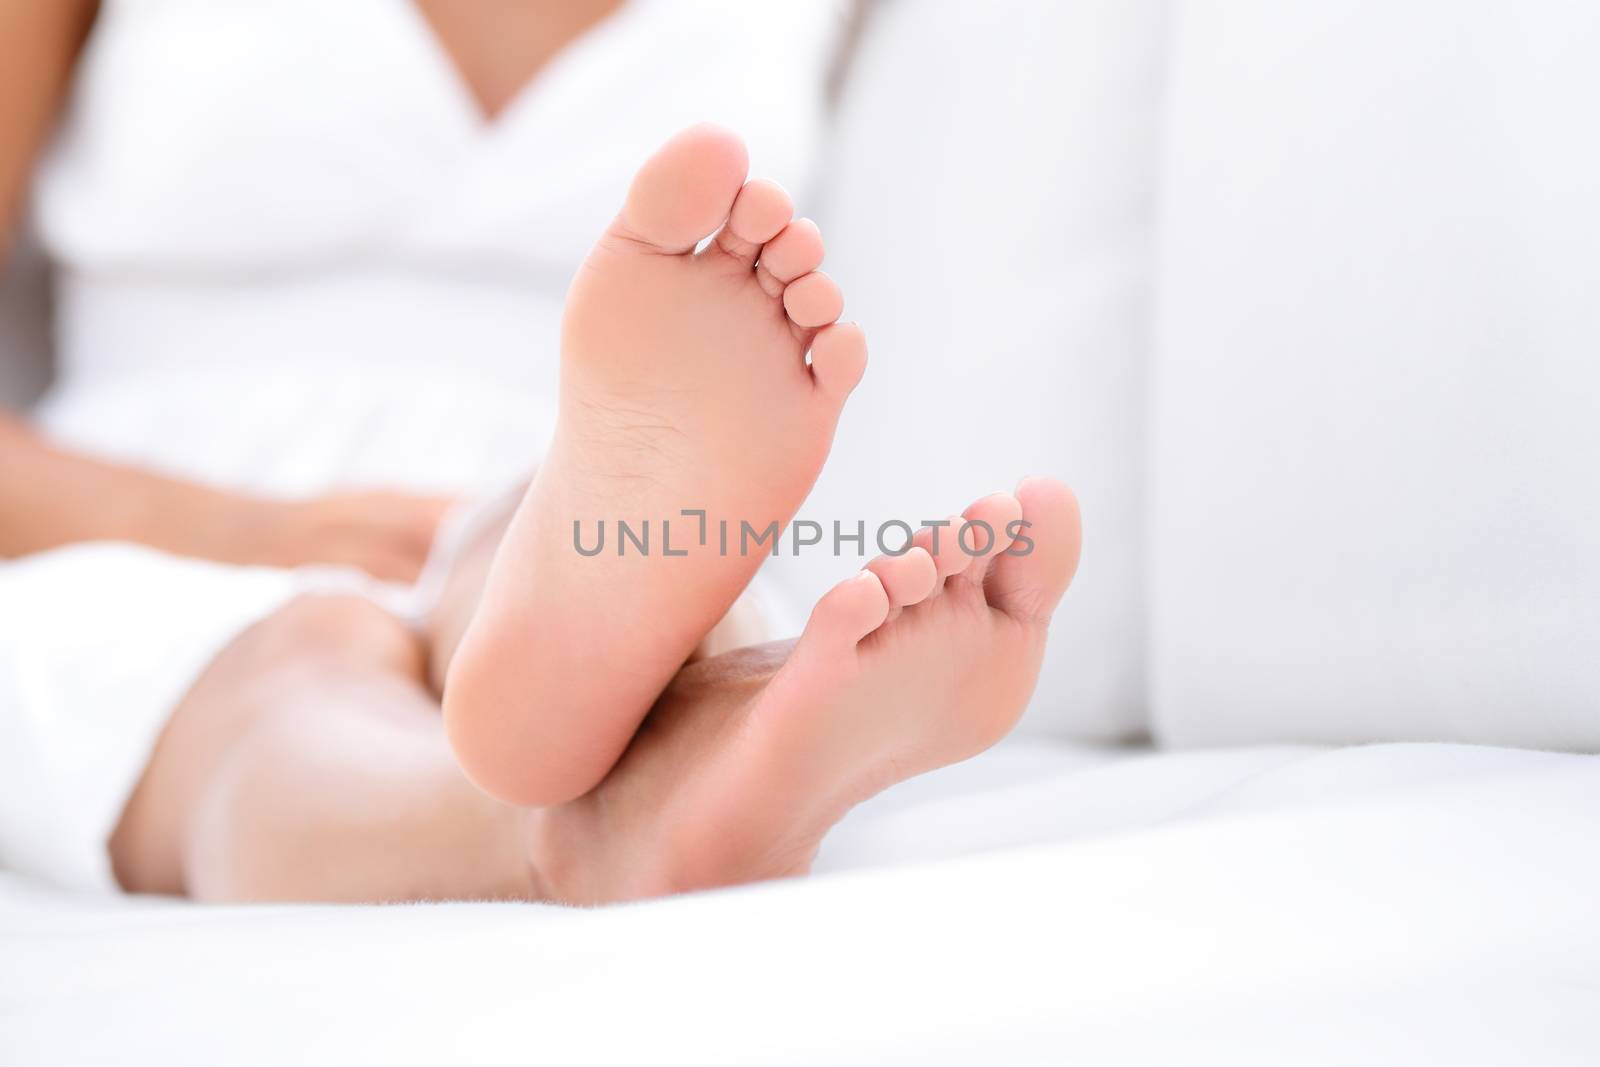 Woman feet closeup - barefoot woman relaxing in sofa. Close up of female feet of young beautiful woman sitting in couch outside.